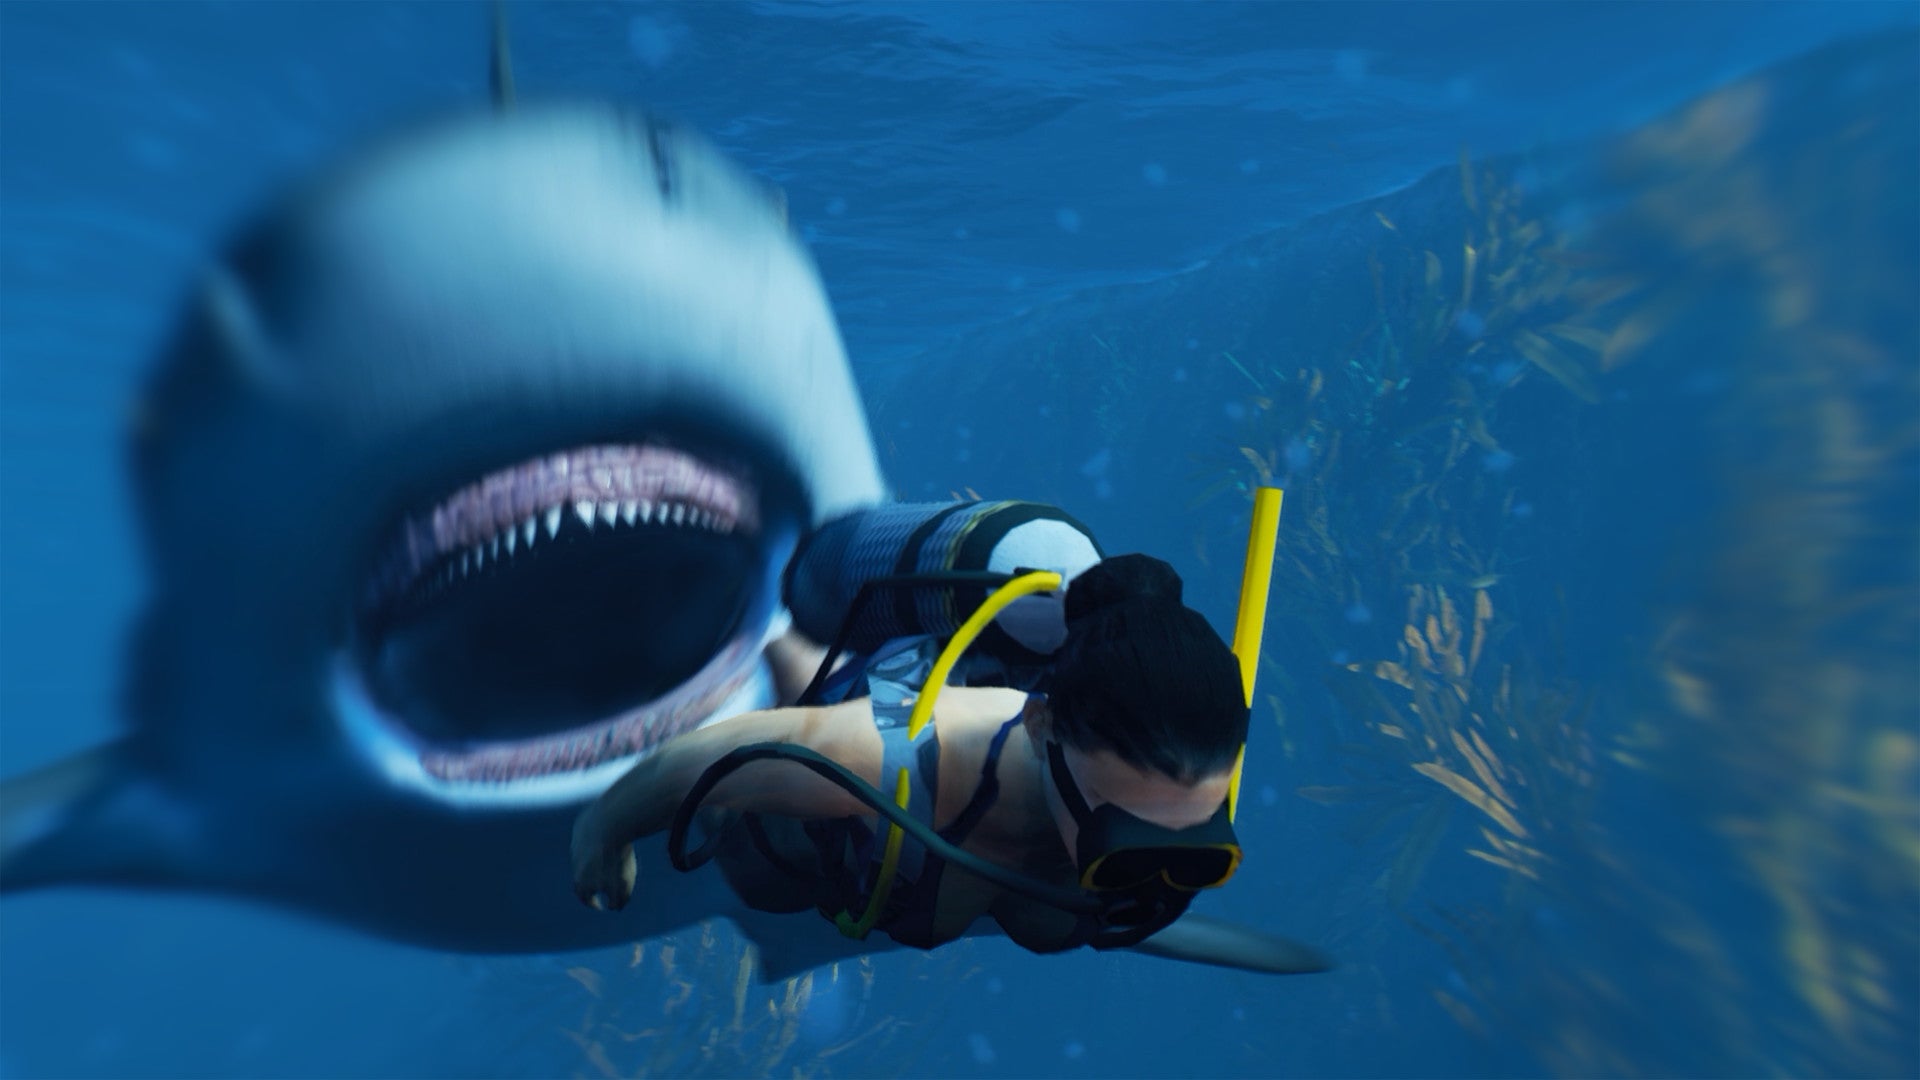 Image for E3 2018: Maneater is an open-world RPG where you play as a shark